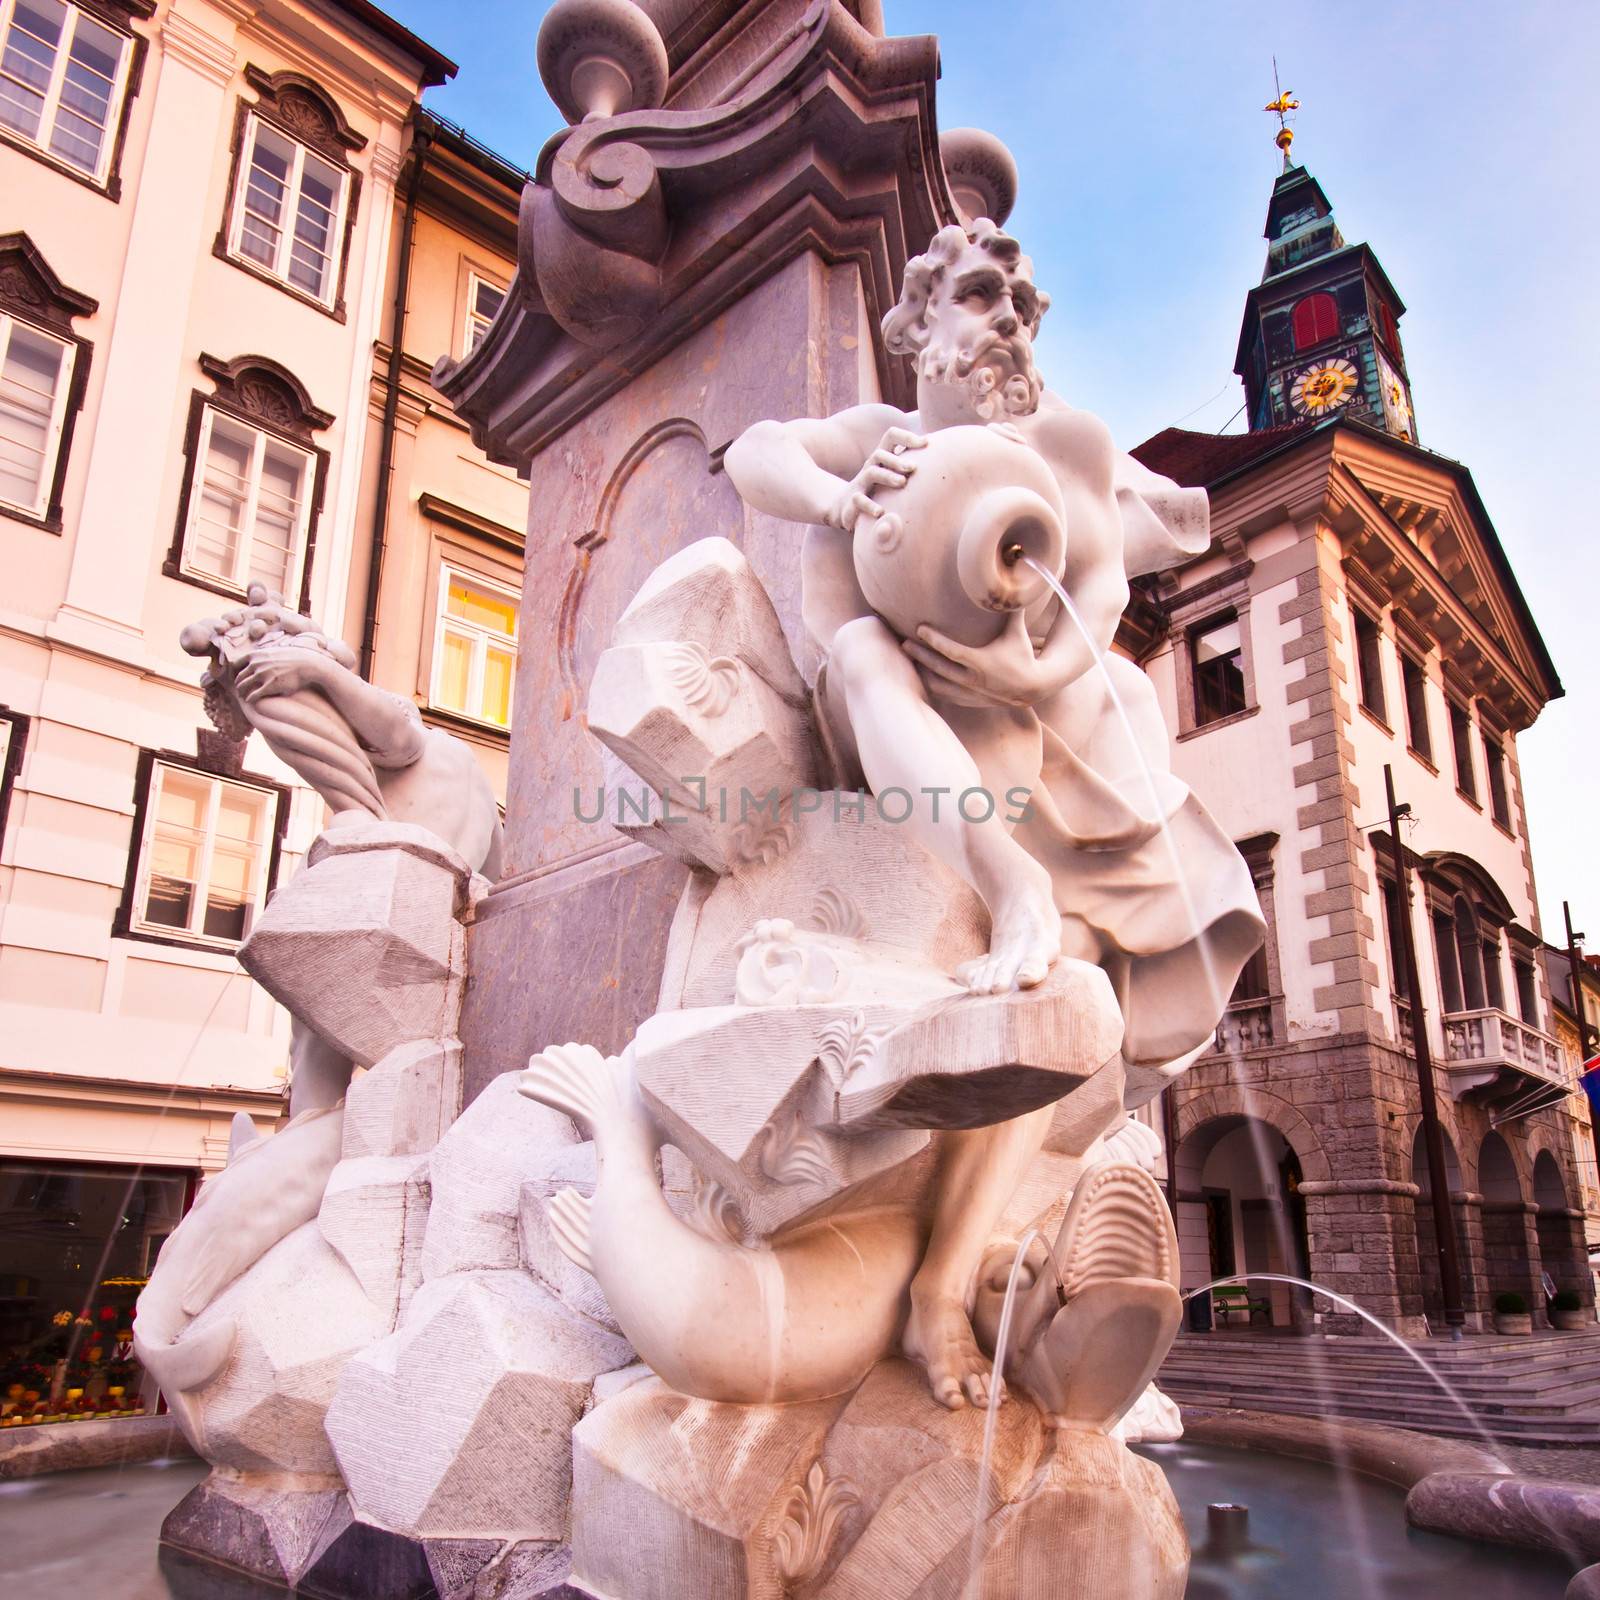 Evening view of Ljubljana's historic city center, Roba's fountain and the town hall in the background.